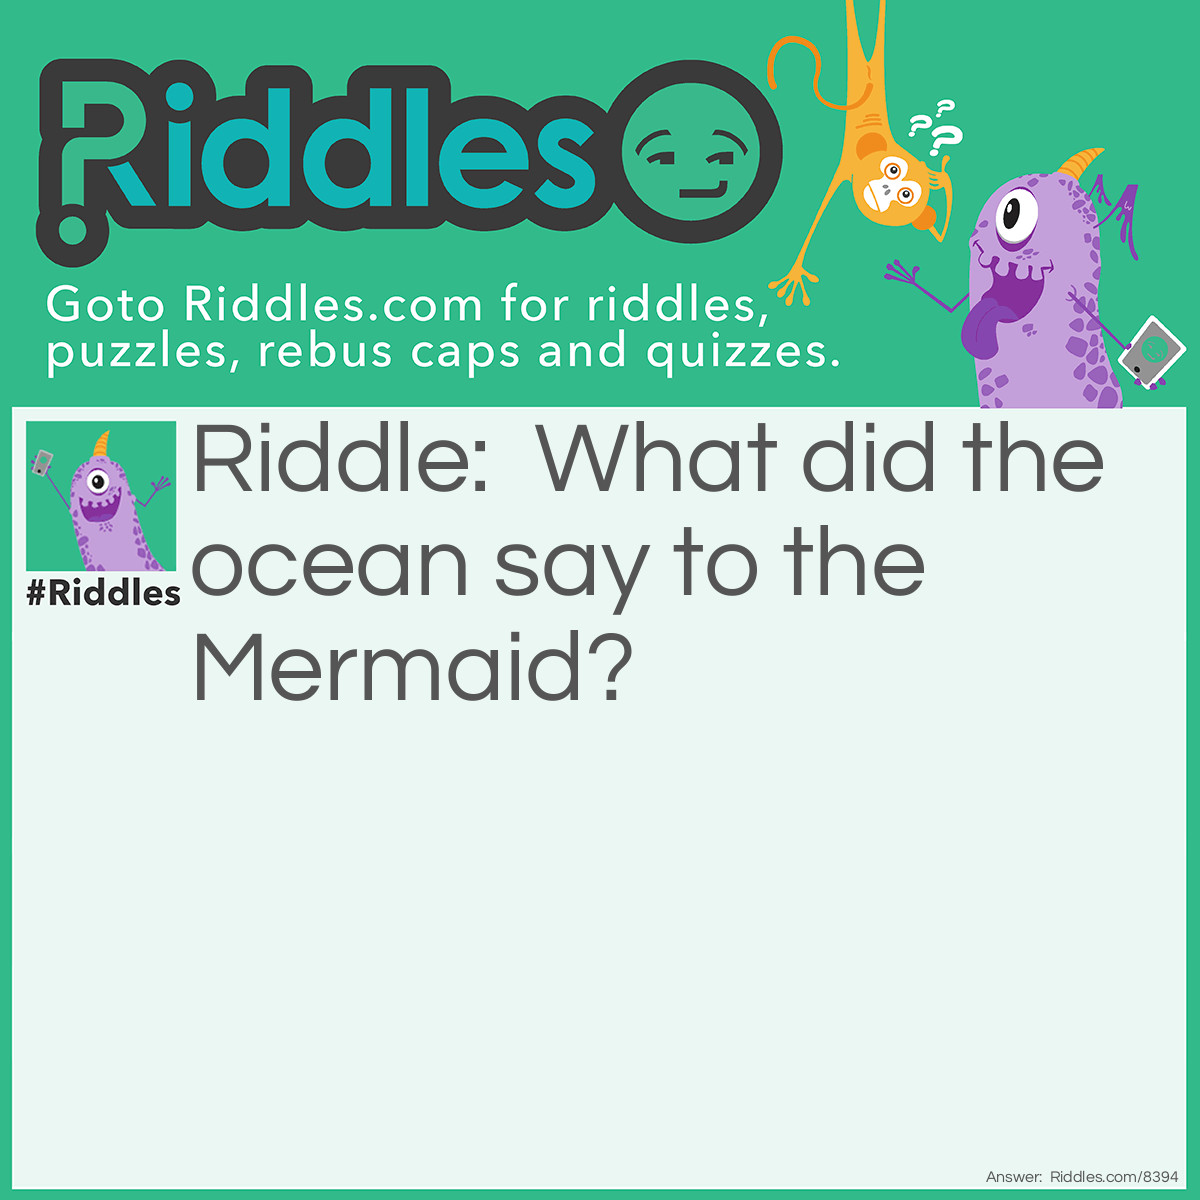 Riddle: What did the ocean say to the Mermaid? Answer: Nothing. It just waved!